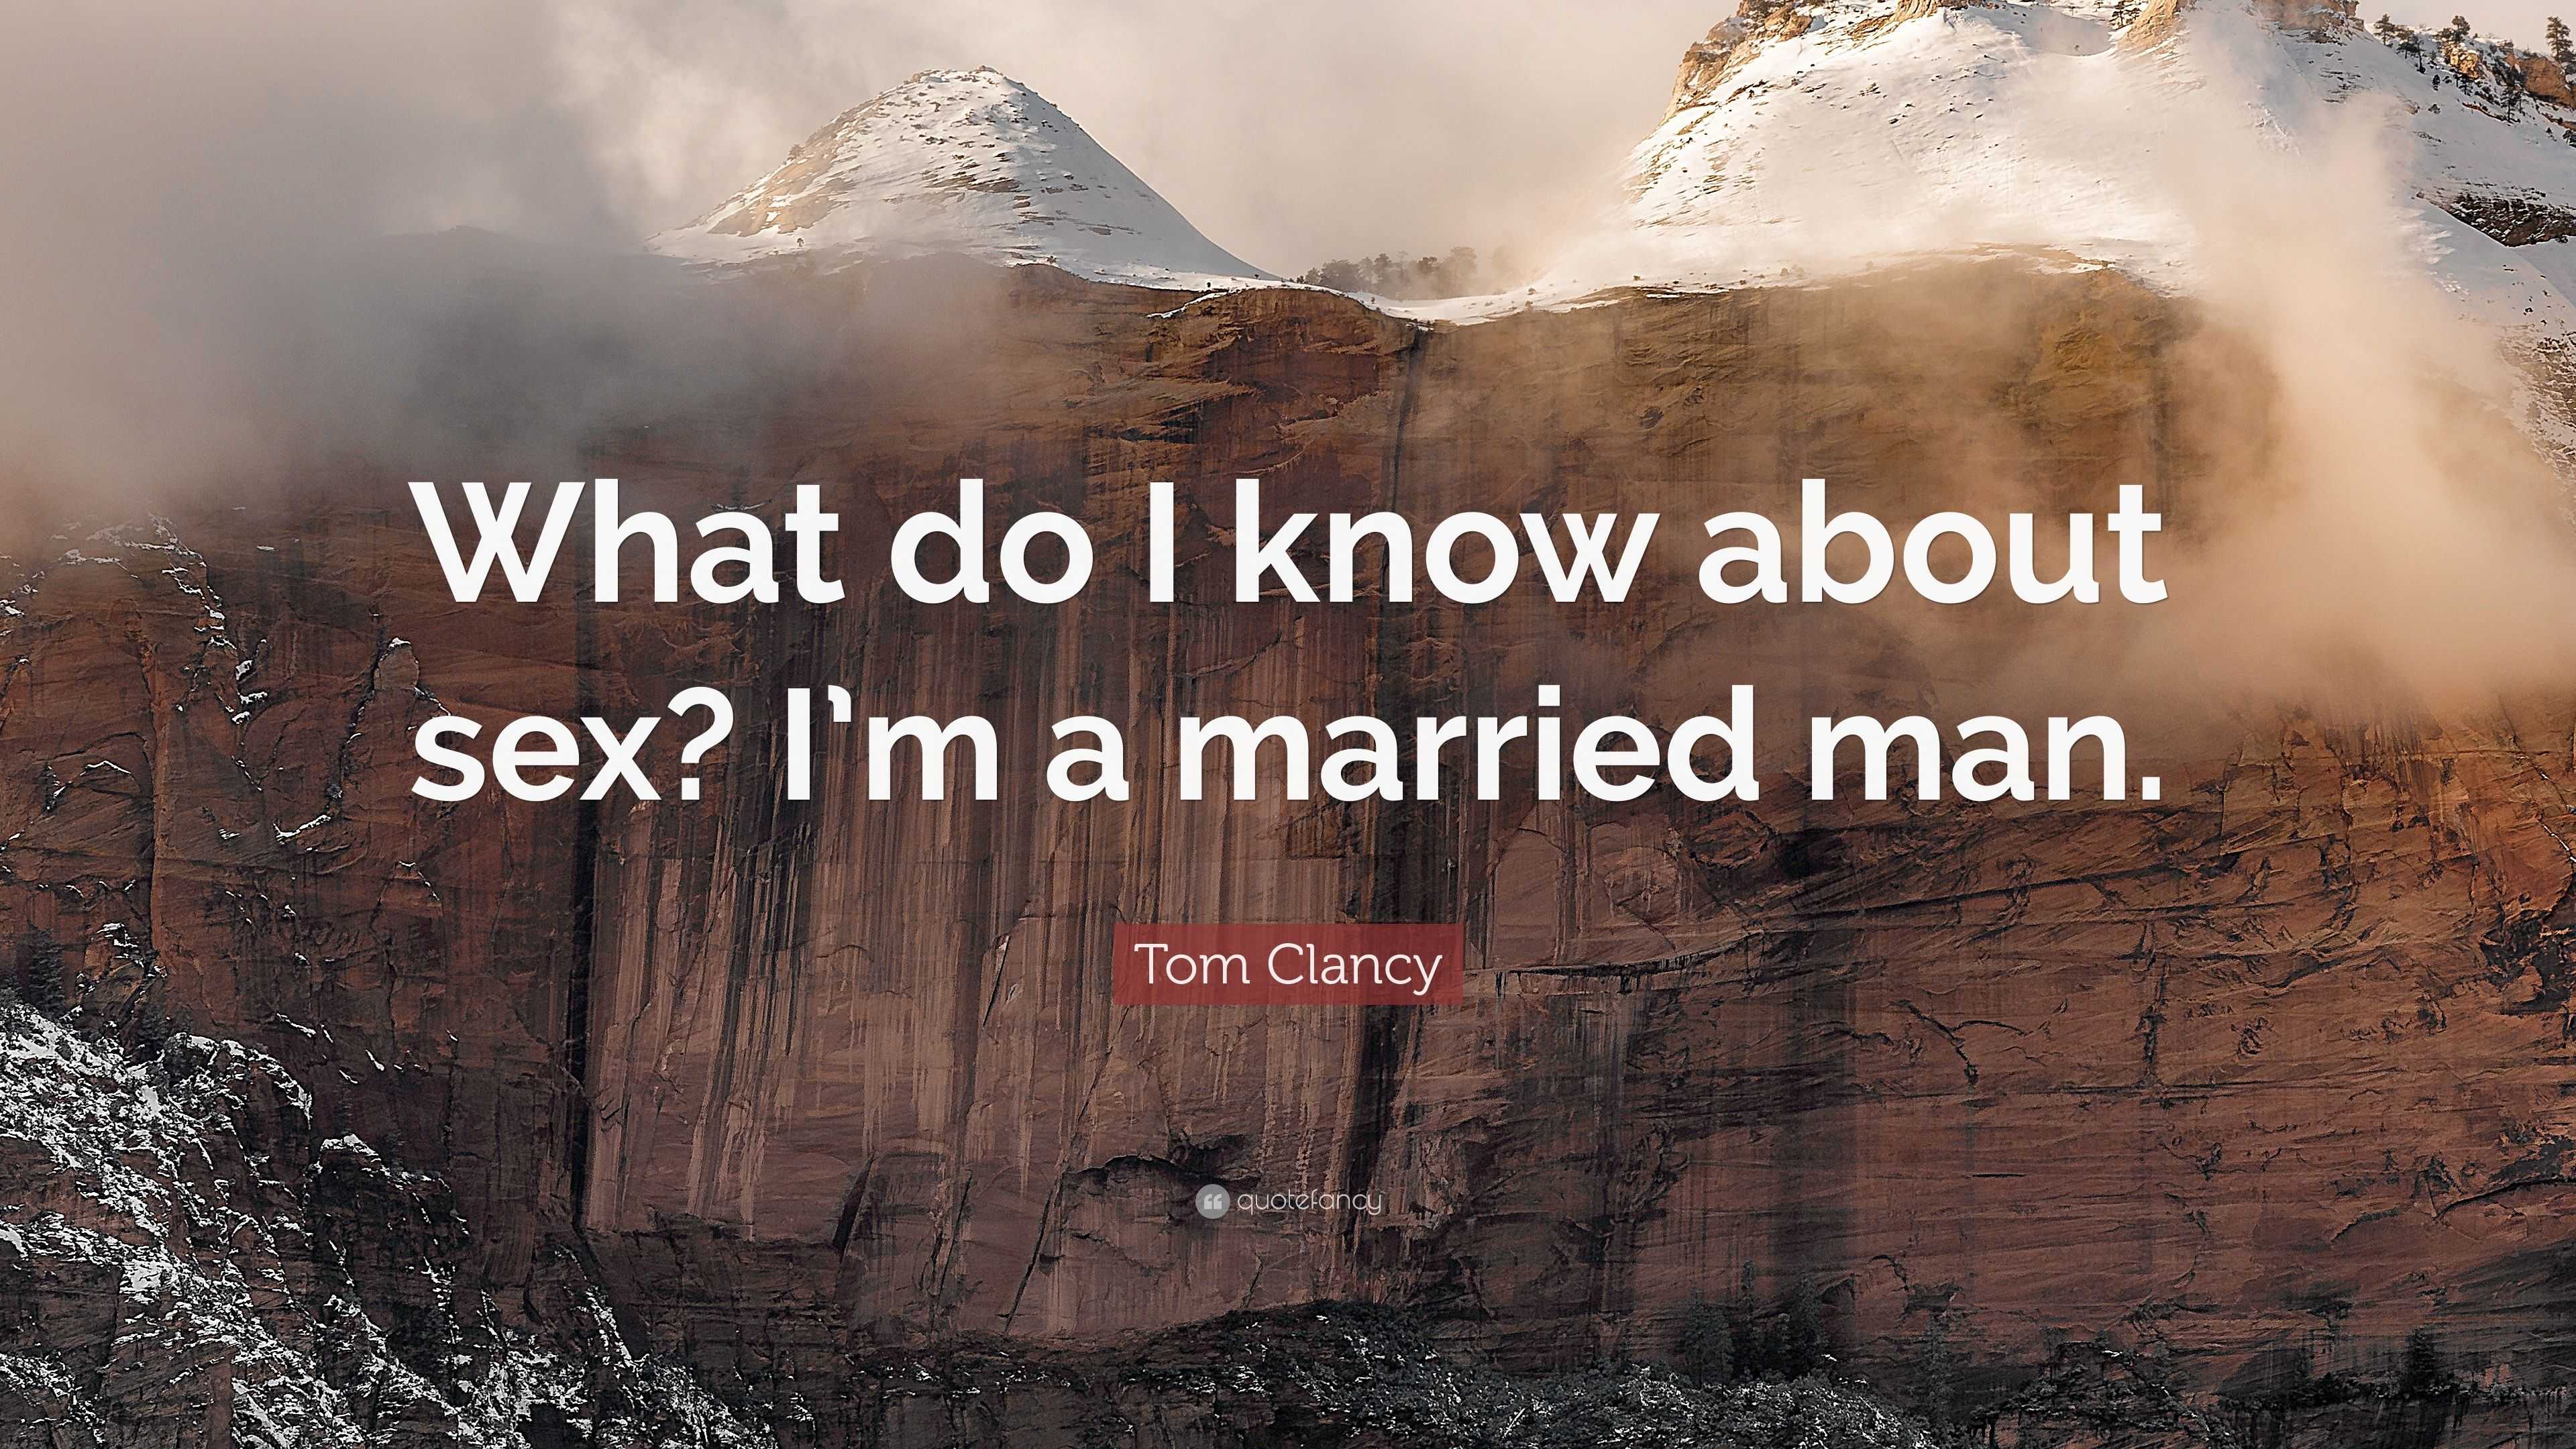 Tom Clancy Quote “What do I know about sex? Im a married man.” pic picture